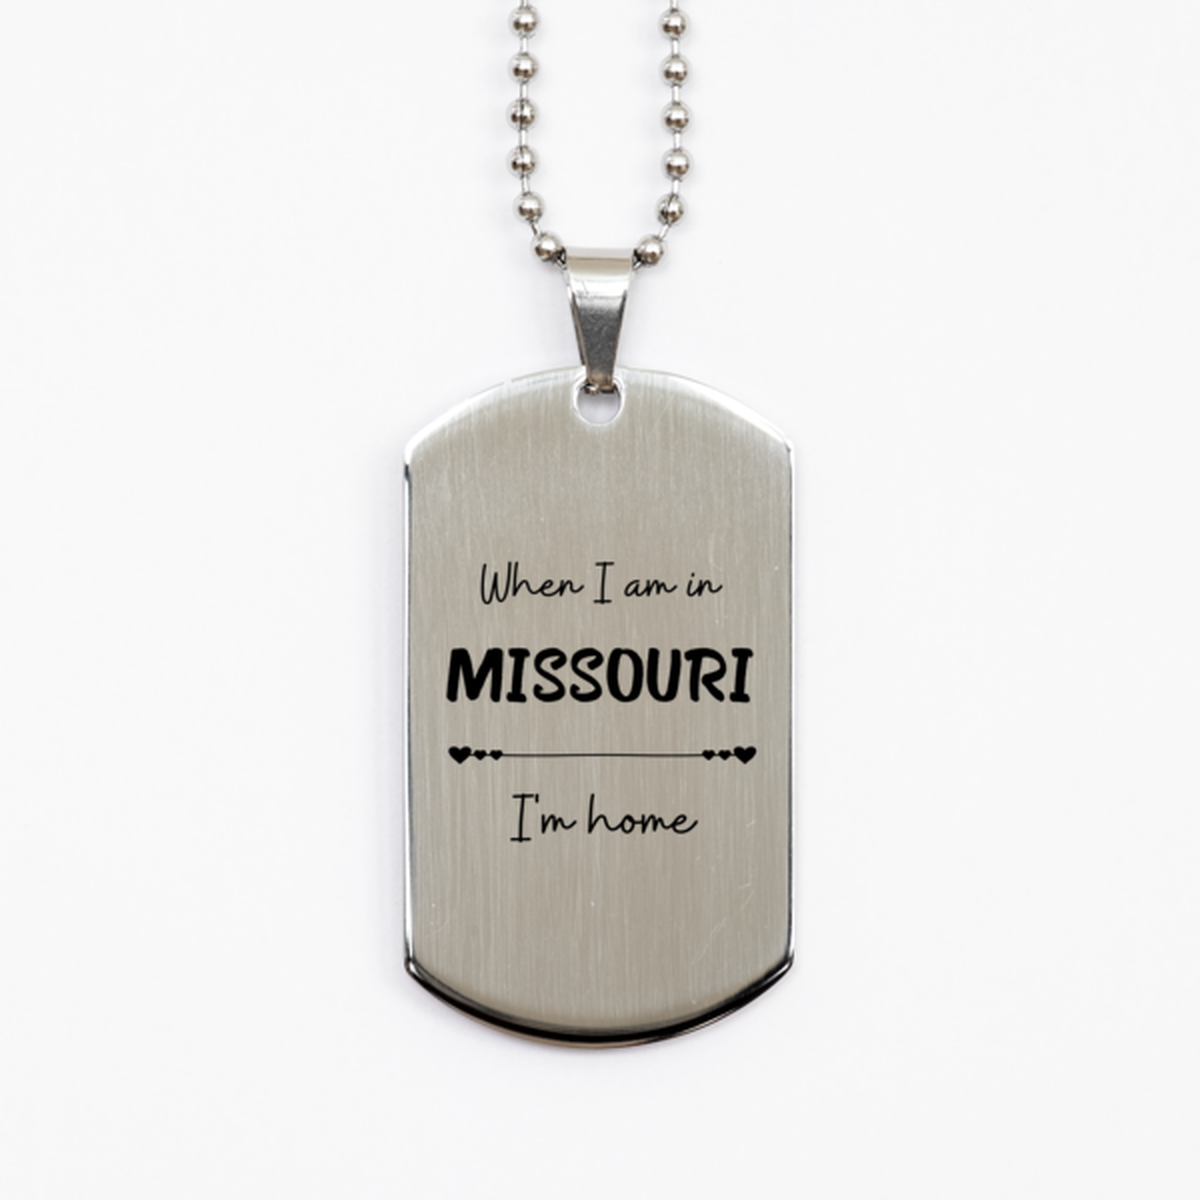 When I am in Missouri I'm home Silver Dog Tag, Cheap Gifts For Missouri, State Missouri Birthday Gifts for Friends Coworker